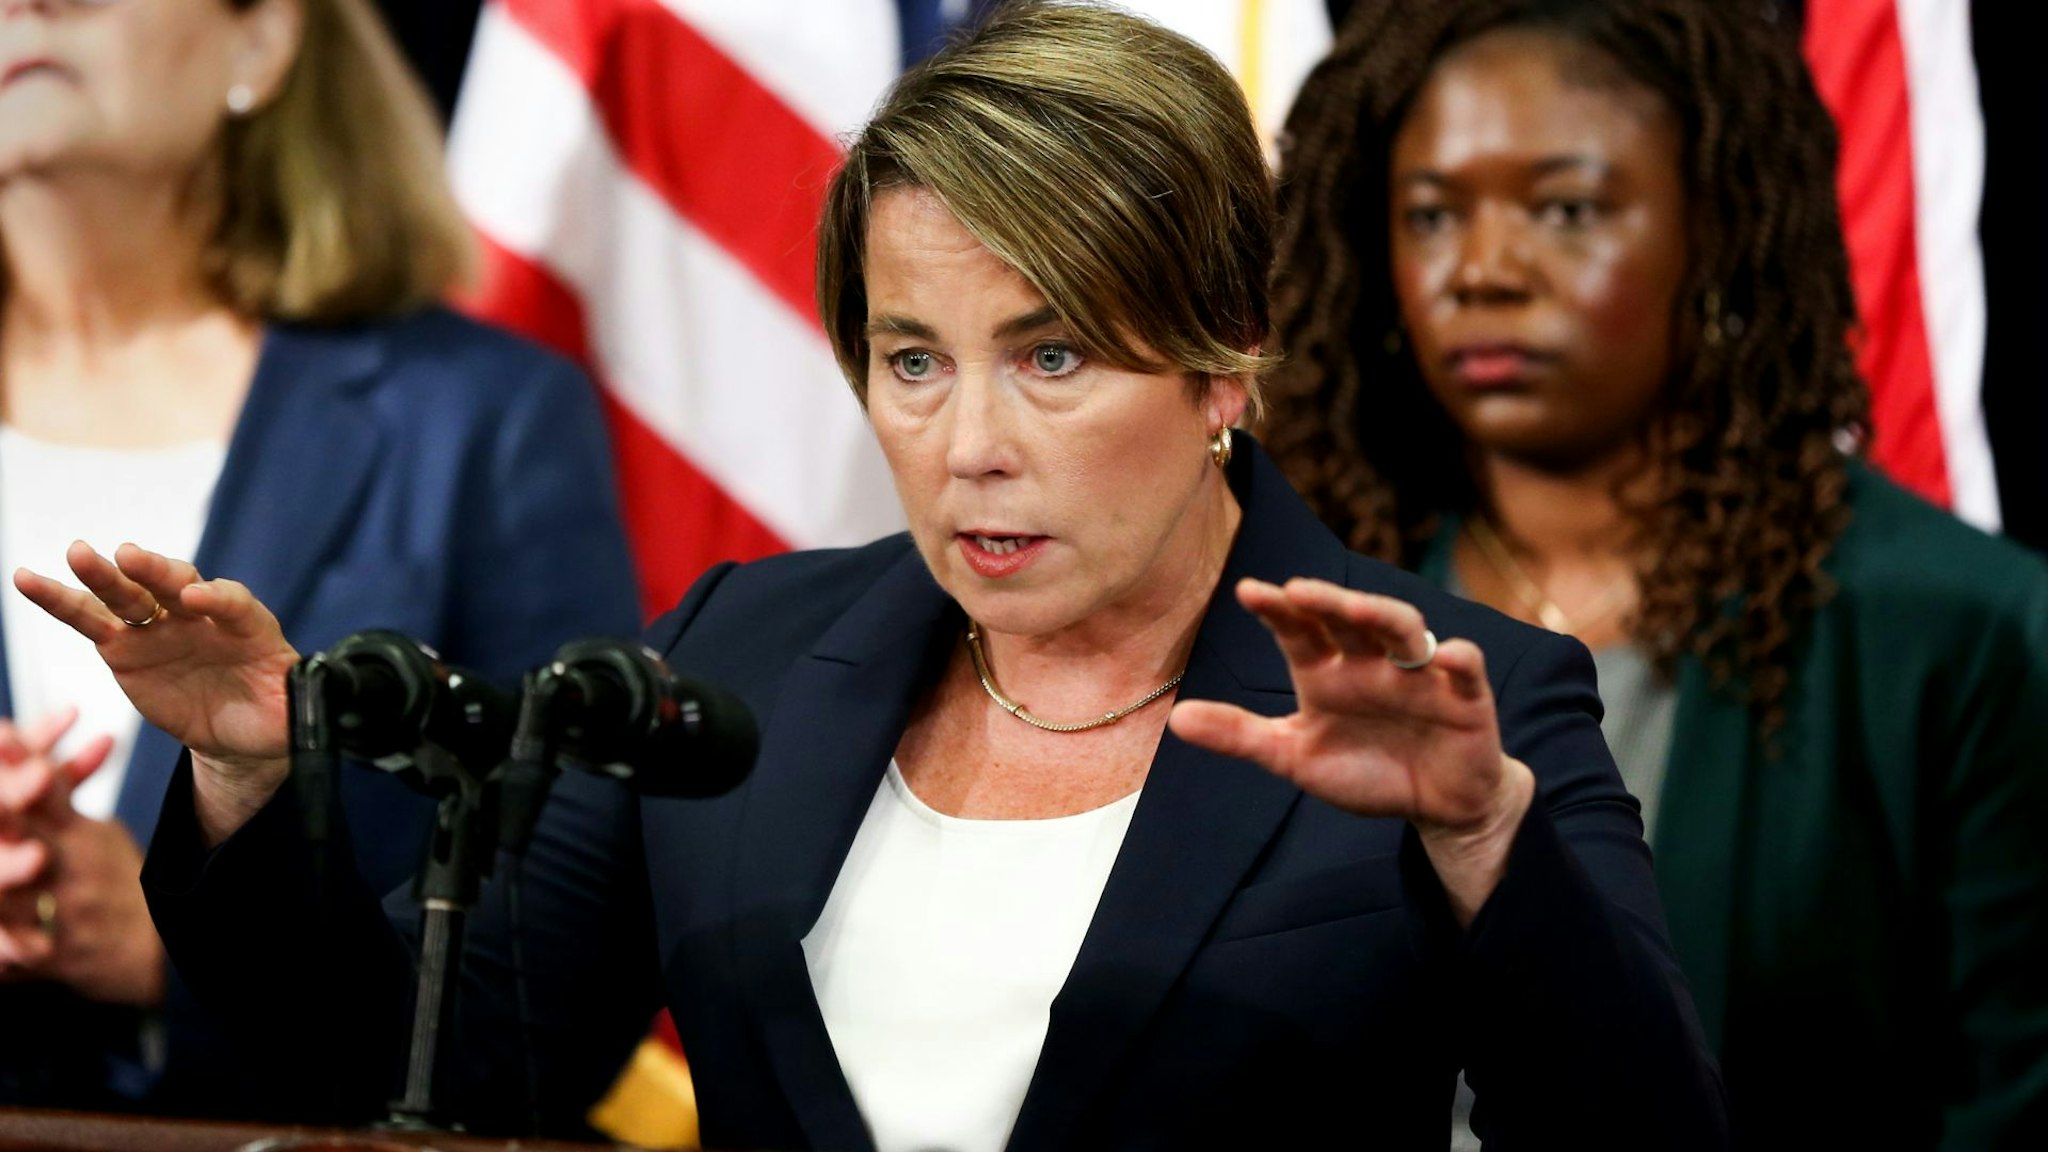 Boston, MA - August 8: Massachusetts Governor Maura Healey held a morning press conference announcing significant action related to the state's emergency shelter system.